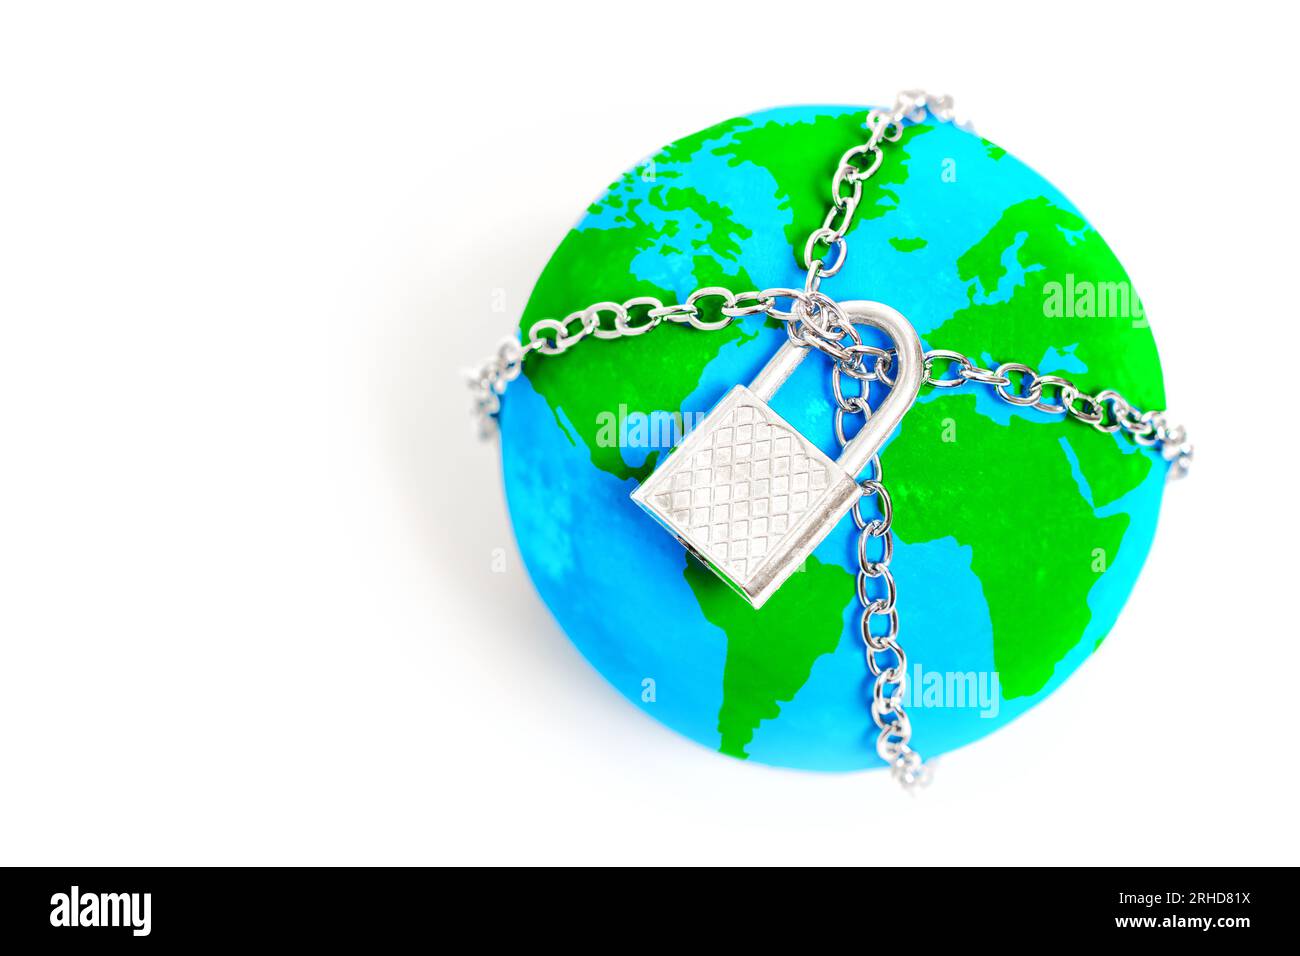 Globe trapped in chains and secured with a padlock isolated on white background. Visual metaphor for the need to break free from all constraints and w Stock Photo